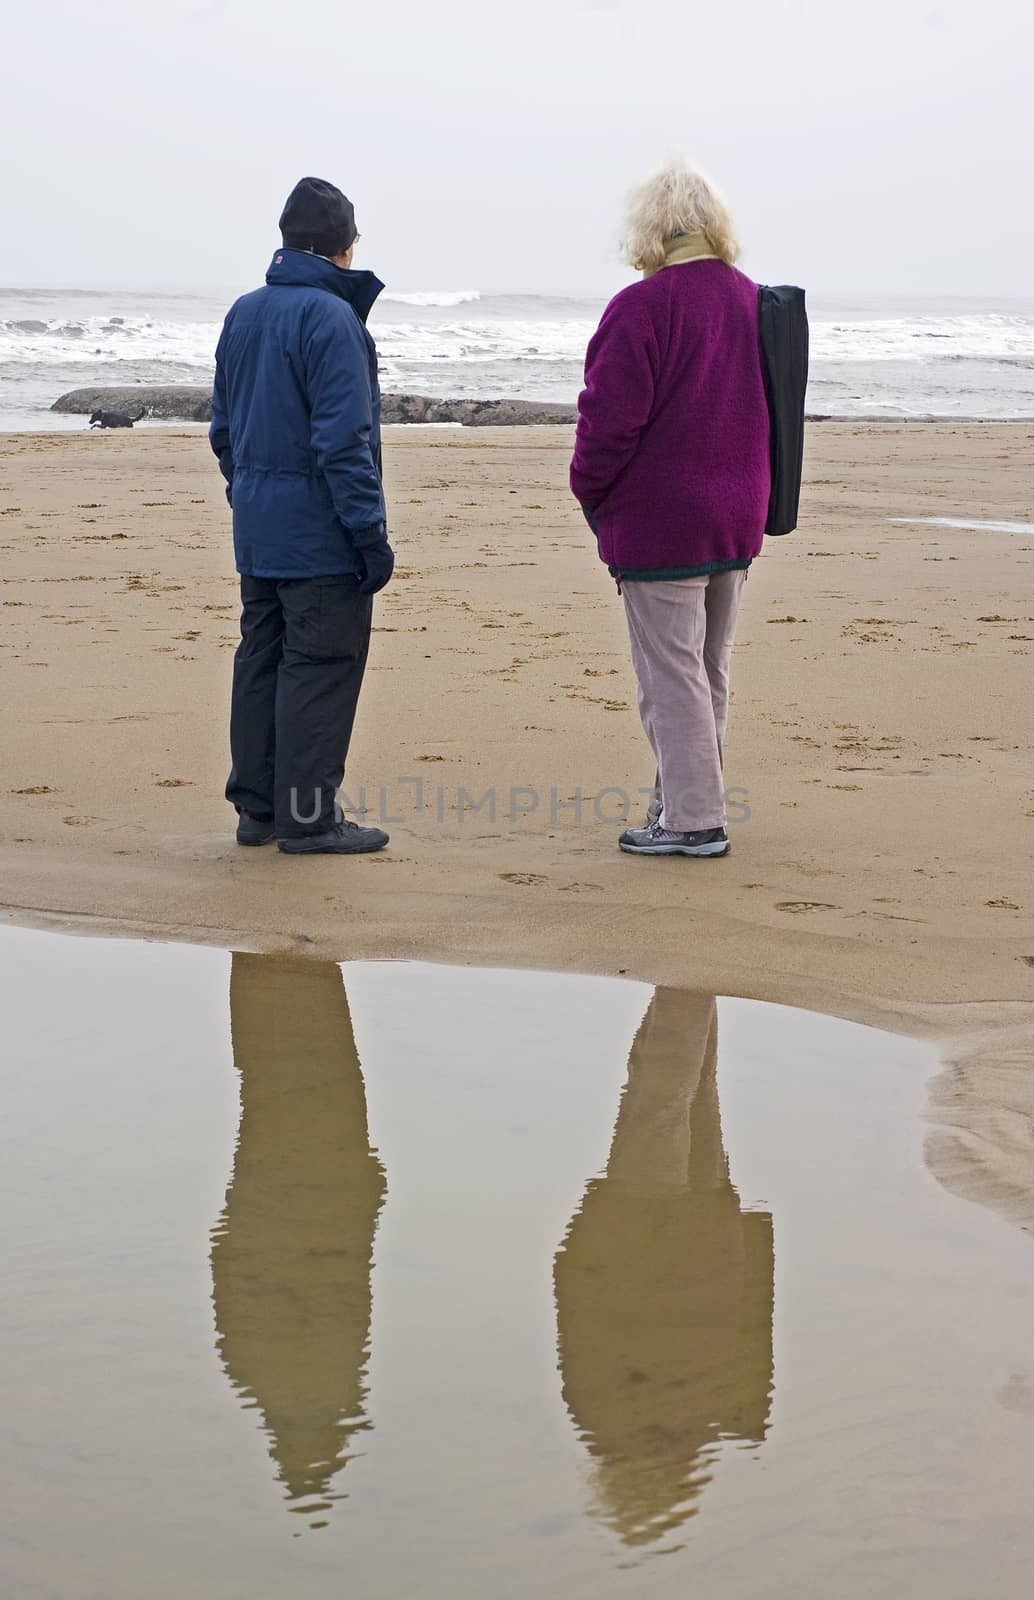 Two people stood on the beach in winter with a reflection in a small pool